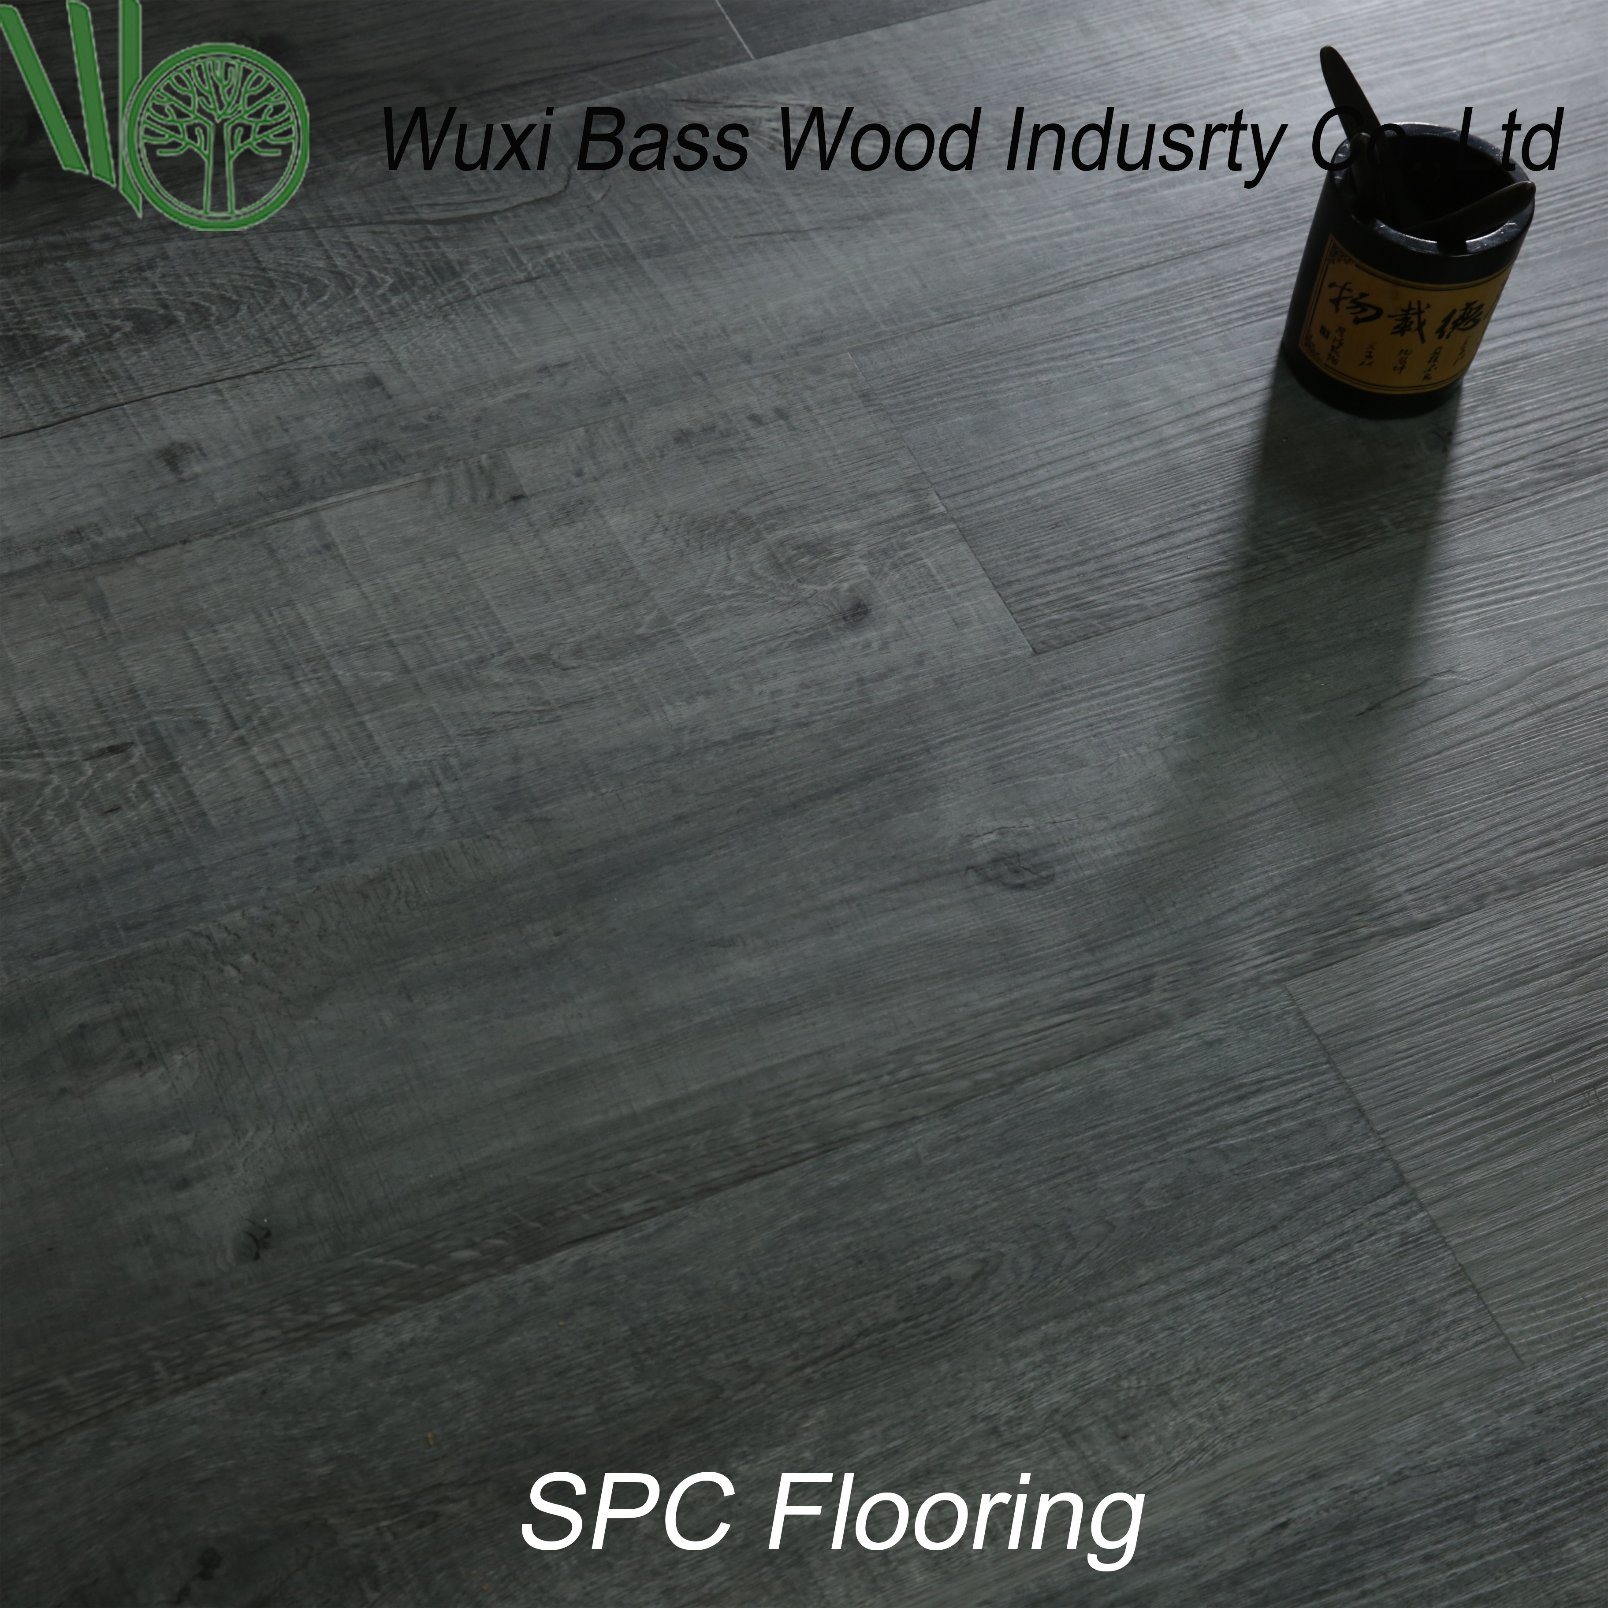 The Popular Product Spc Flooring for Its Water-Proof